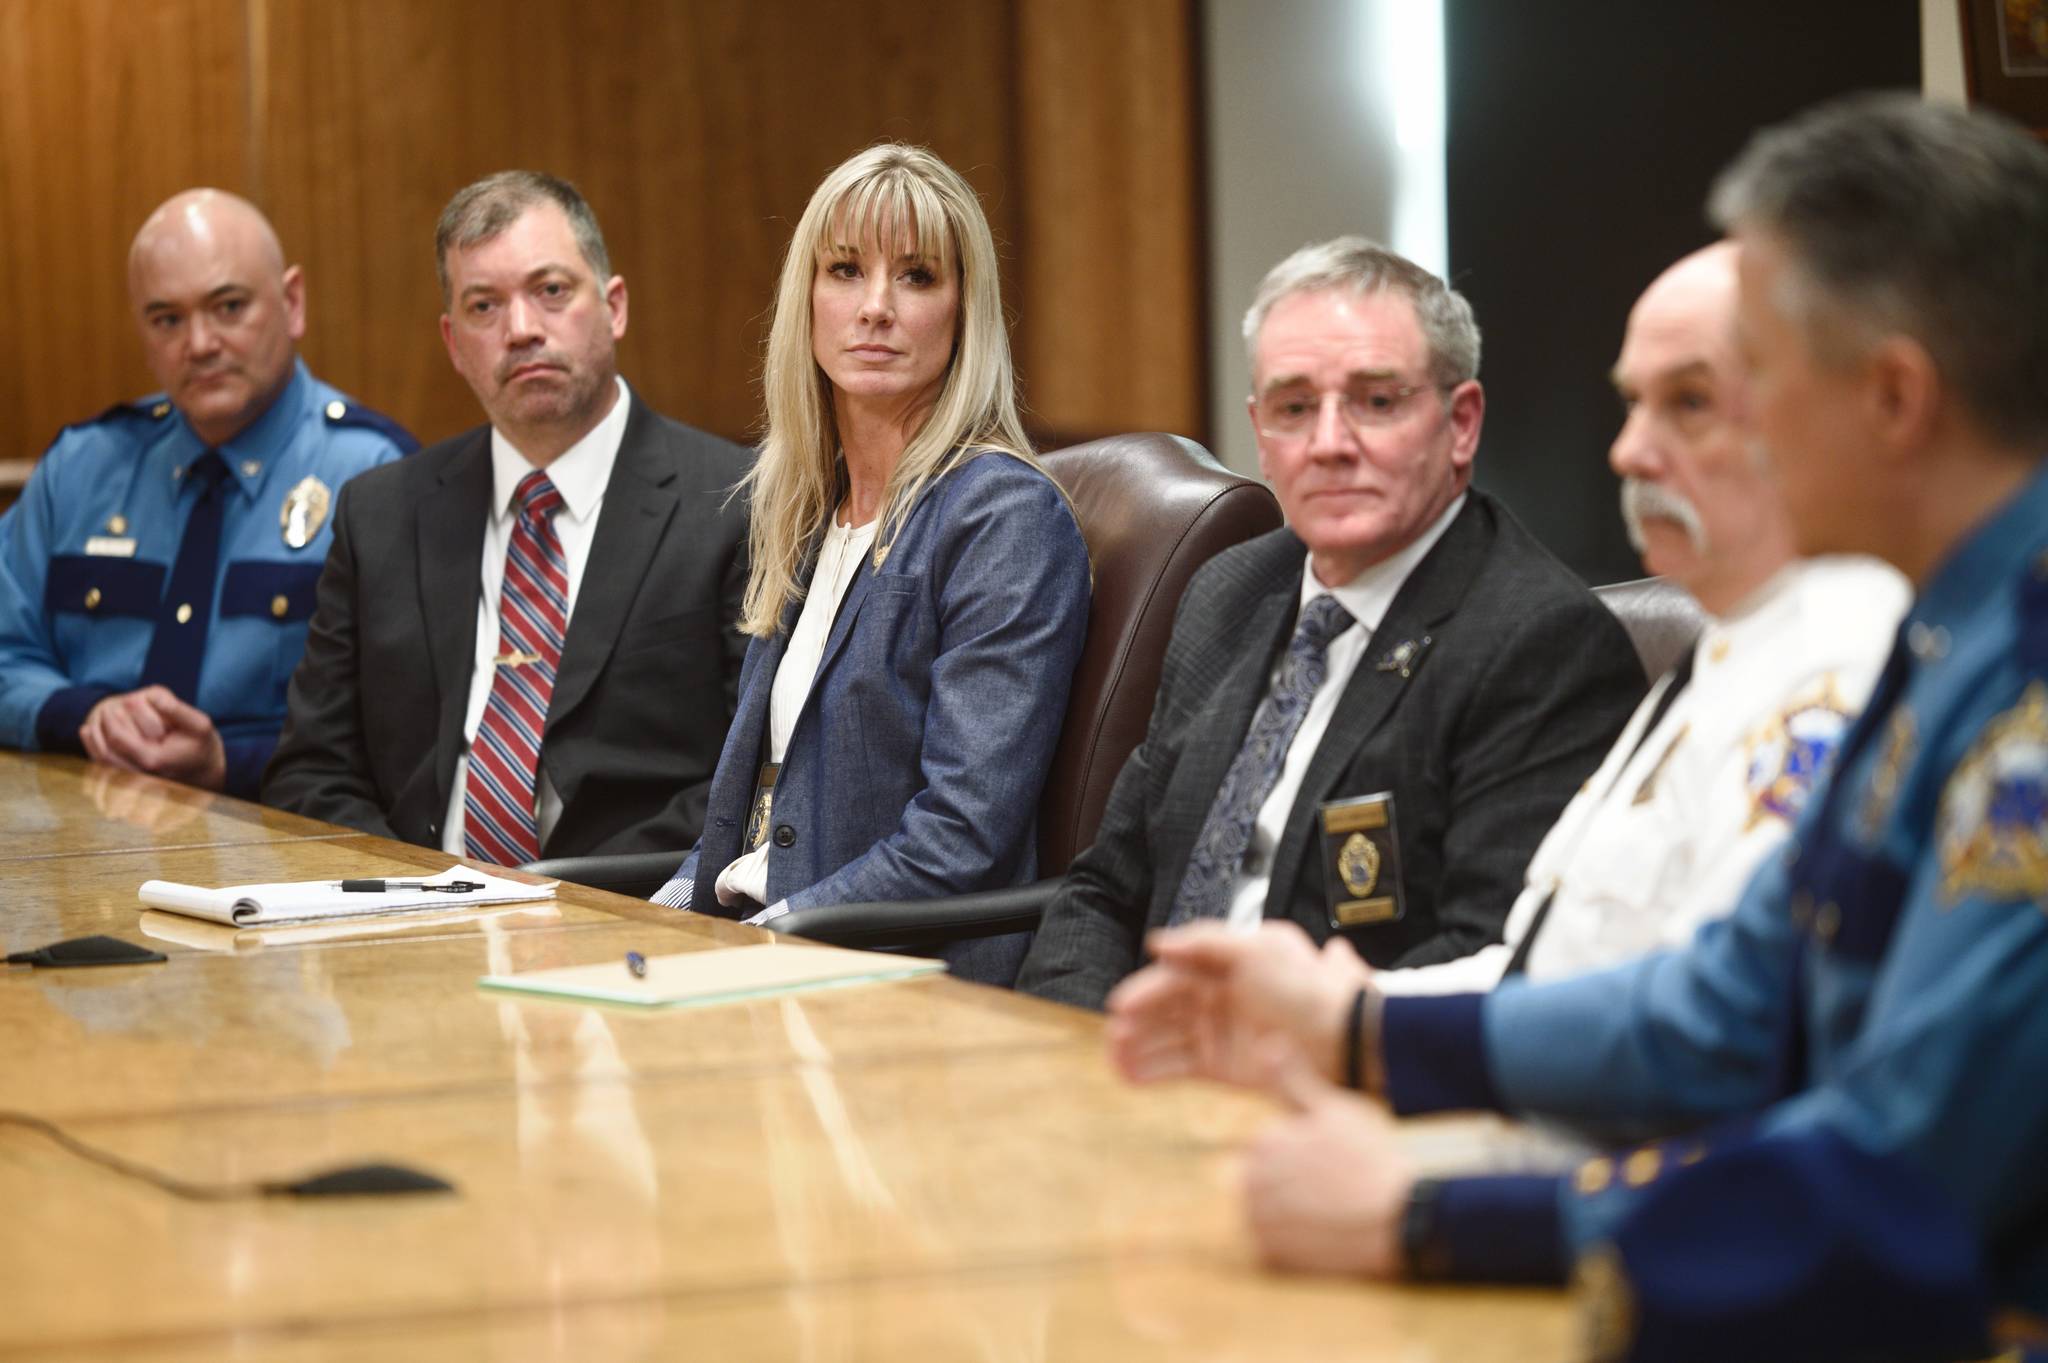 Amanda Price, Commissioner of the Department of Public Safety, center, is surrounded by Department of Public Safety officials during a press conference on her confirmation to the position at the Capitol on Tuesday, April 16, 2019. (Michael Penn | Juneau Empire)